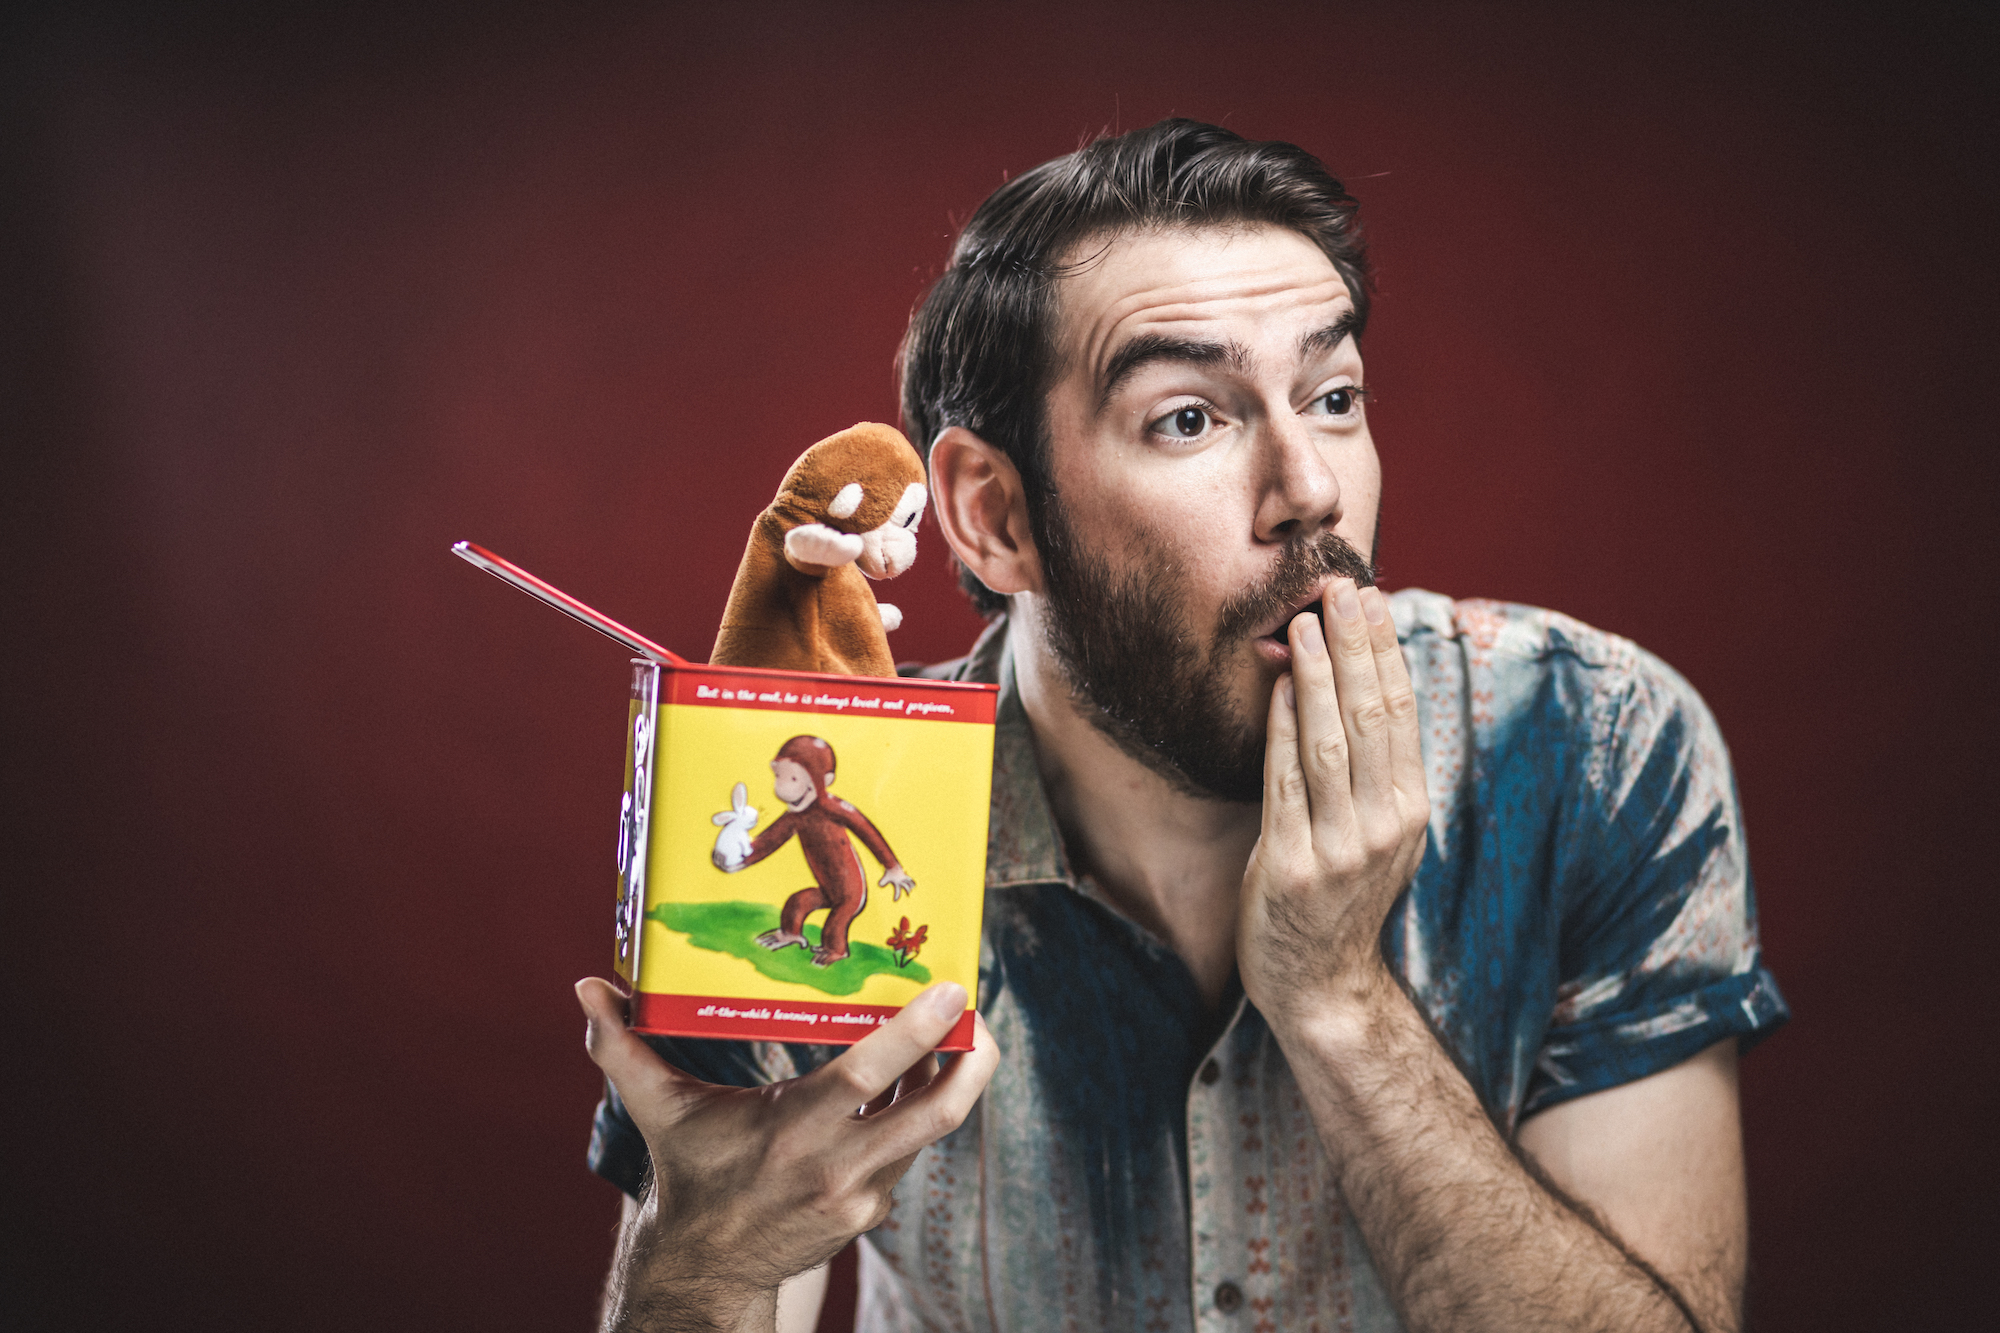 Man with light skin holds a Curious George jack-in-the-box and covers his mouth with one hand, surprised